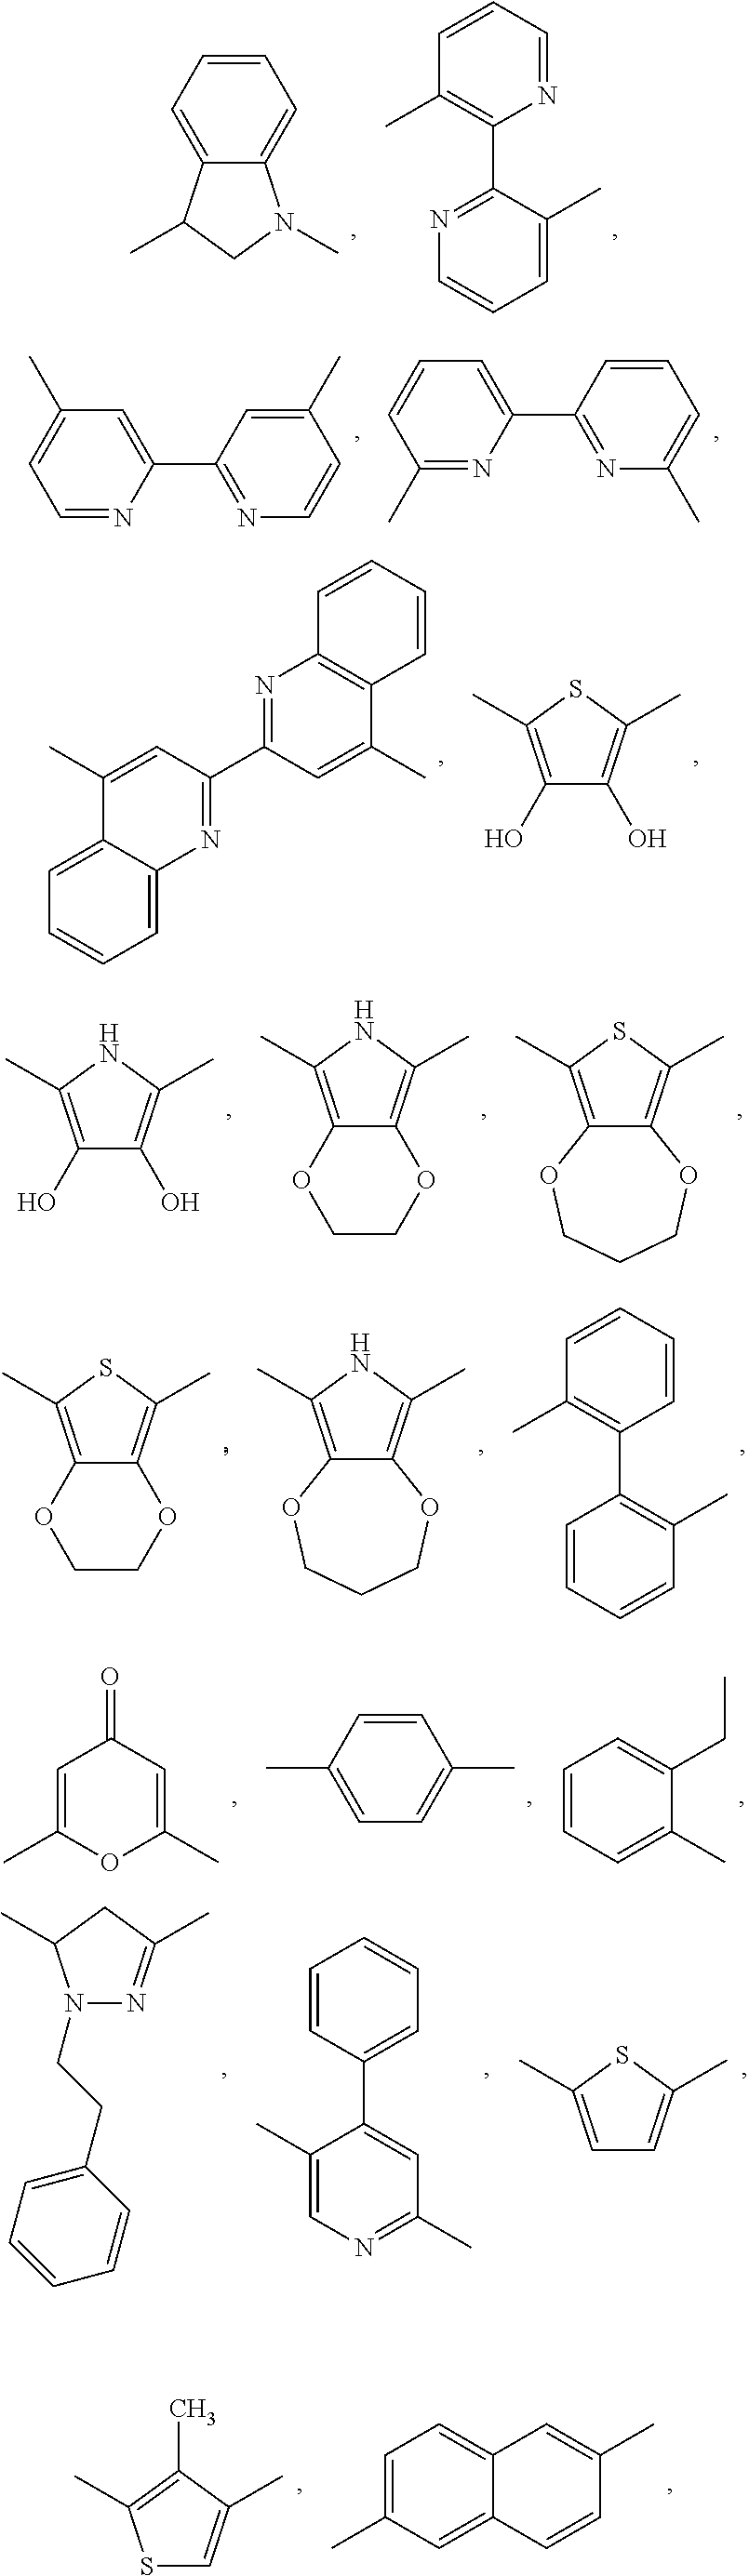 Aromatic compounds with sulfur containing ligands